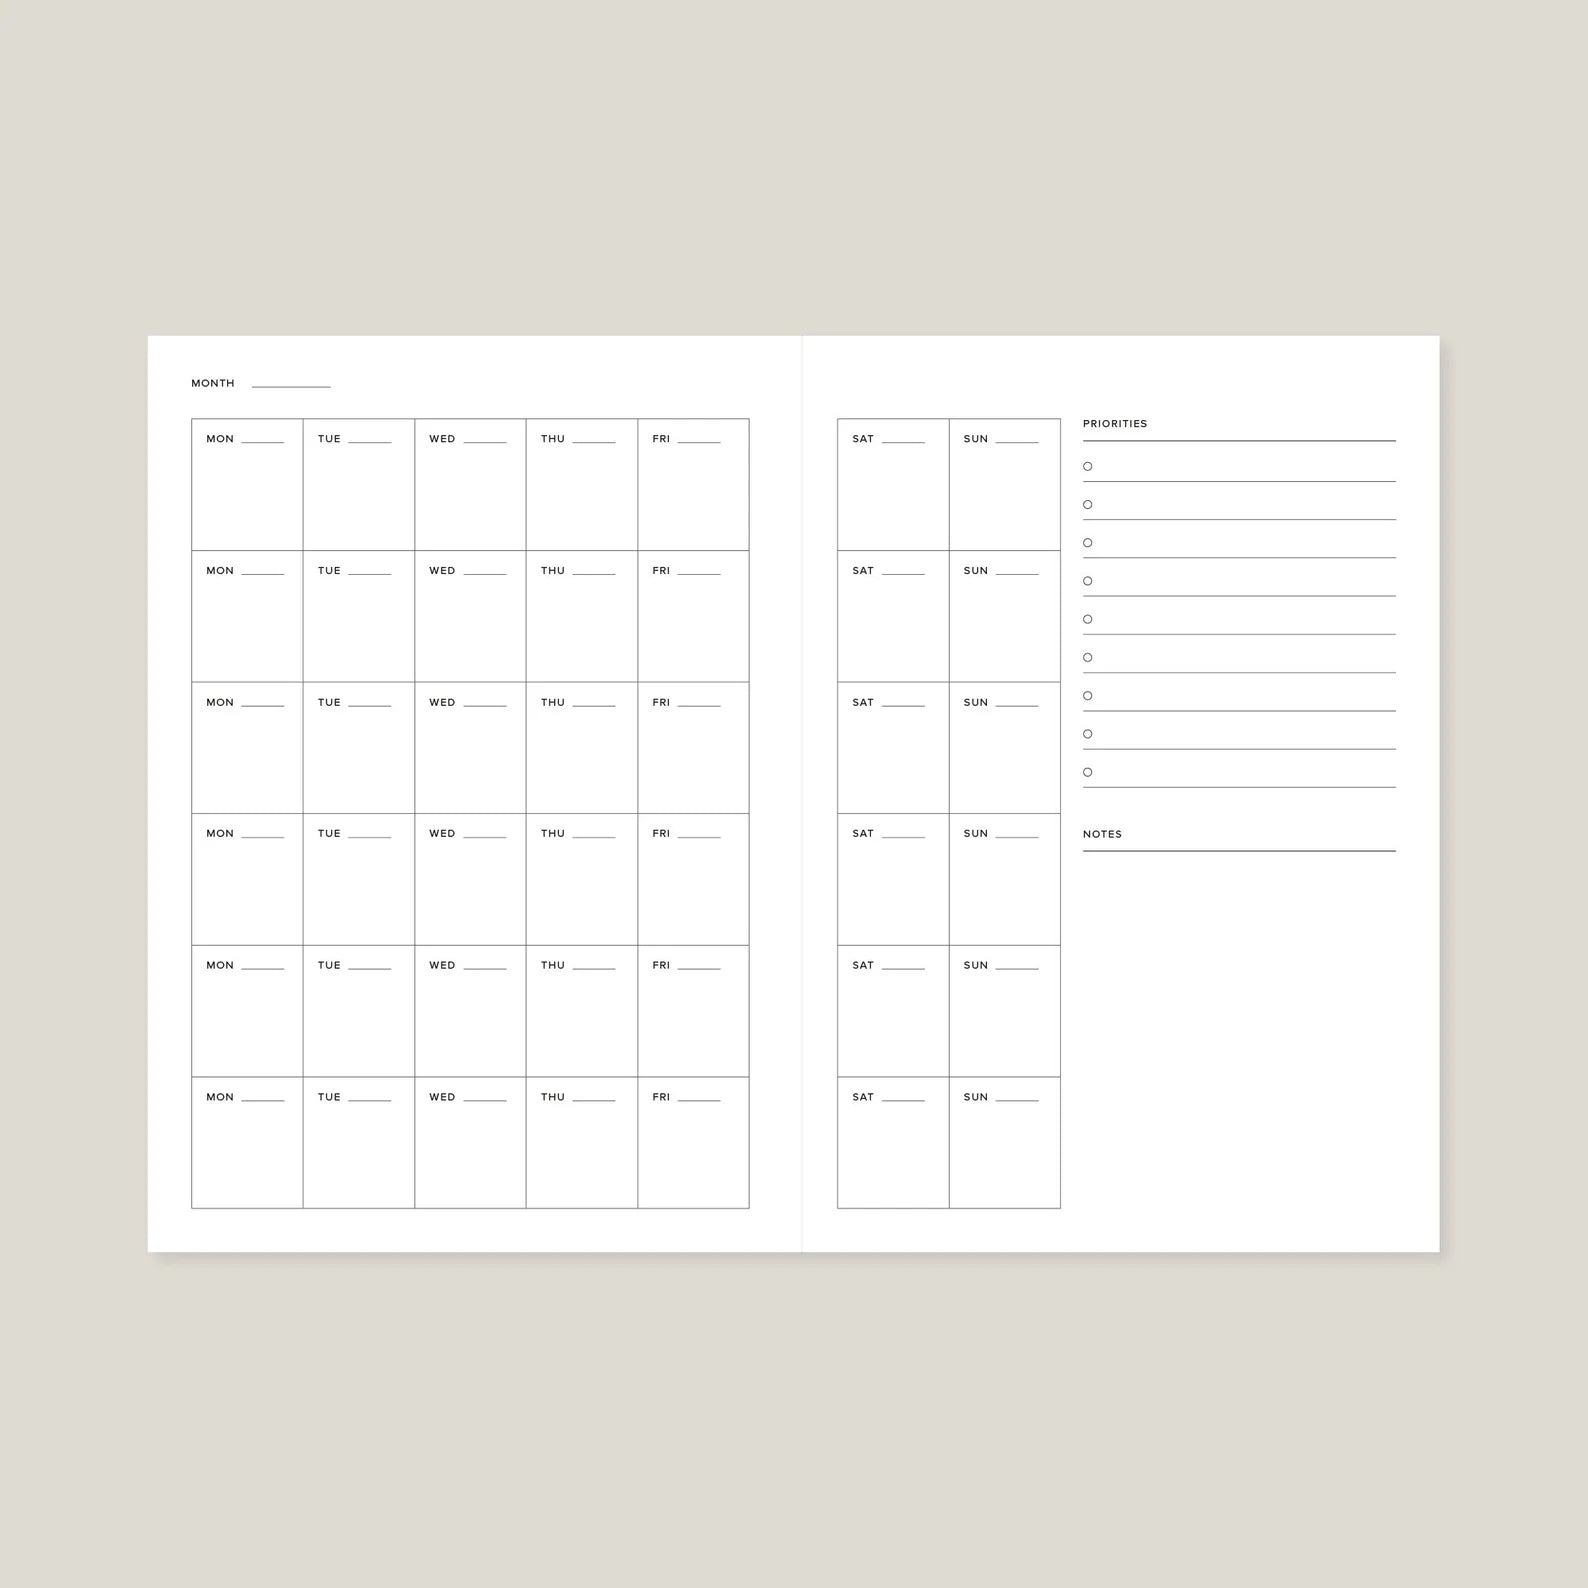 Weekly Planner, A5, Undated in Monochrome Dalmatian